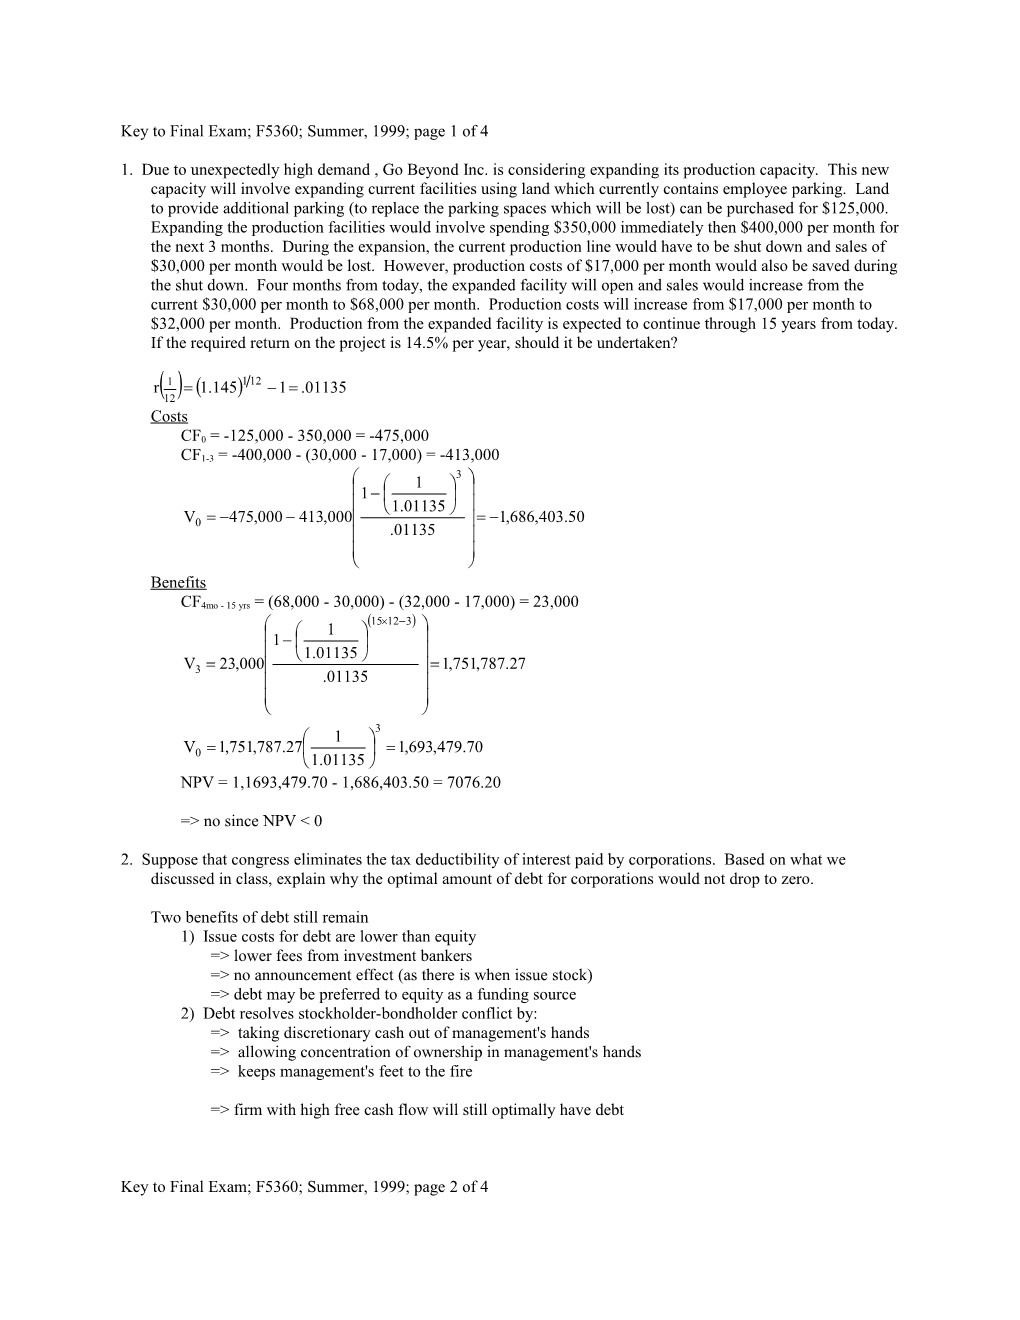 Key to Final Exam; F5360; Summer, 1999; Page 1 of 4